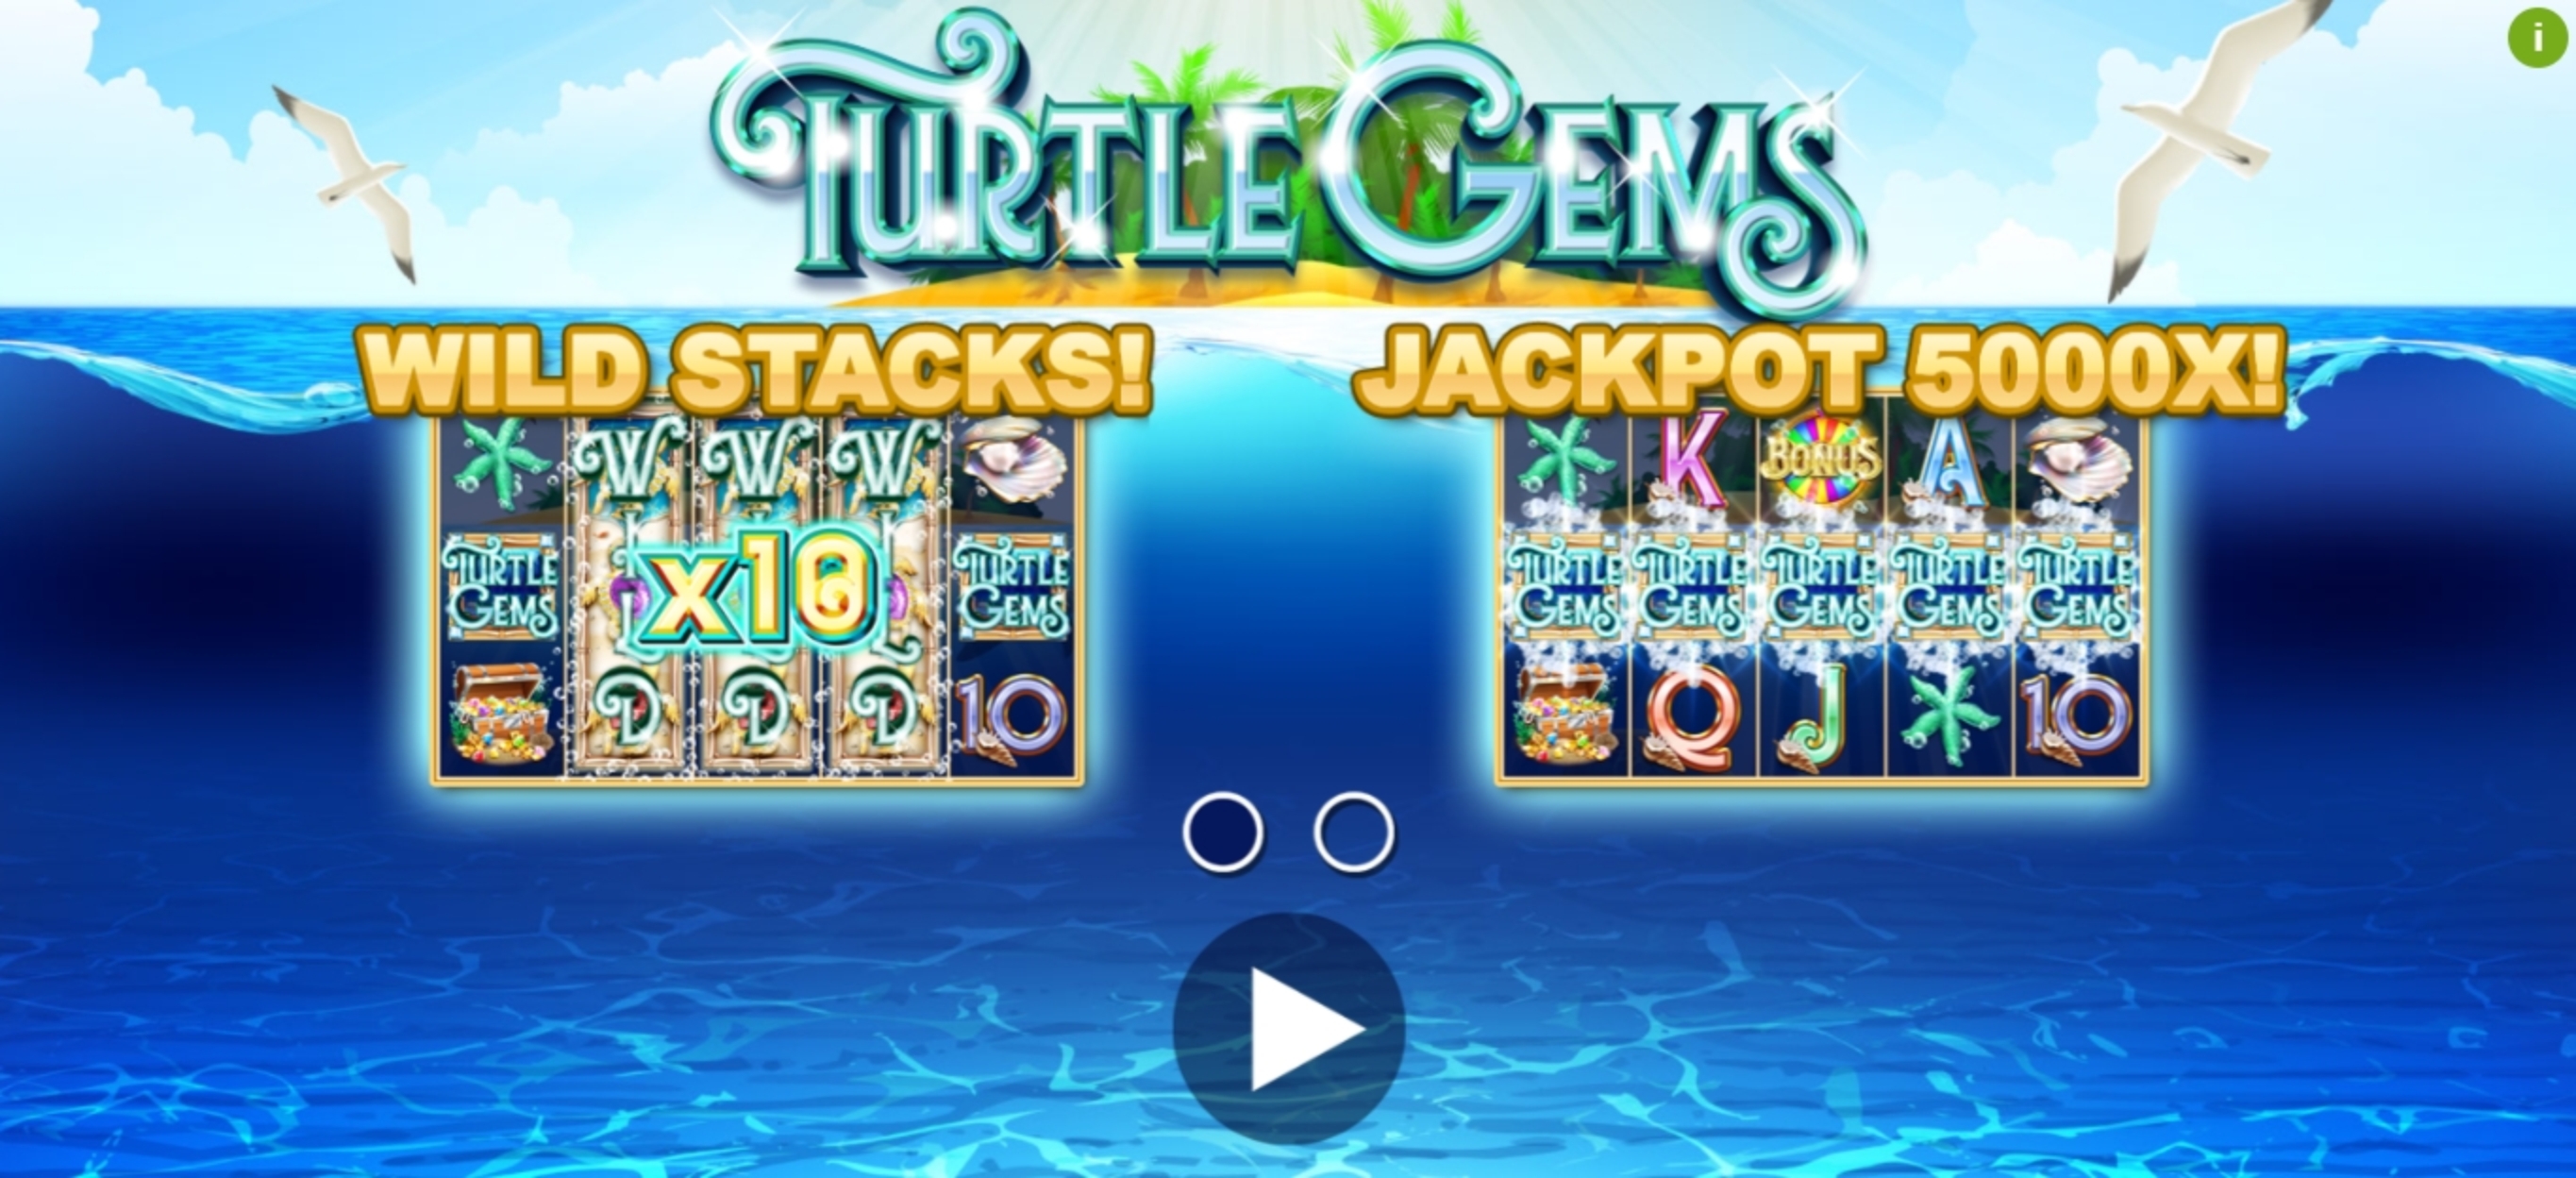 Play Turtle Gems Free Casino Slot Game by Playlogics